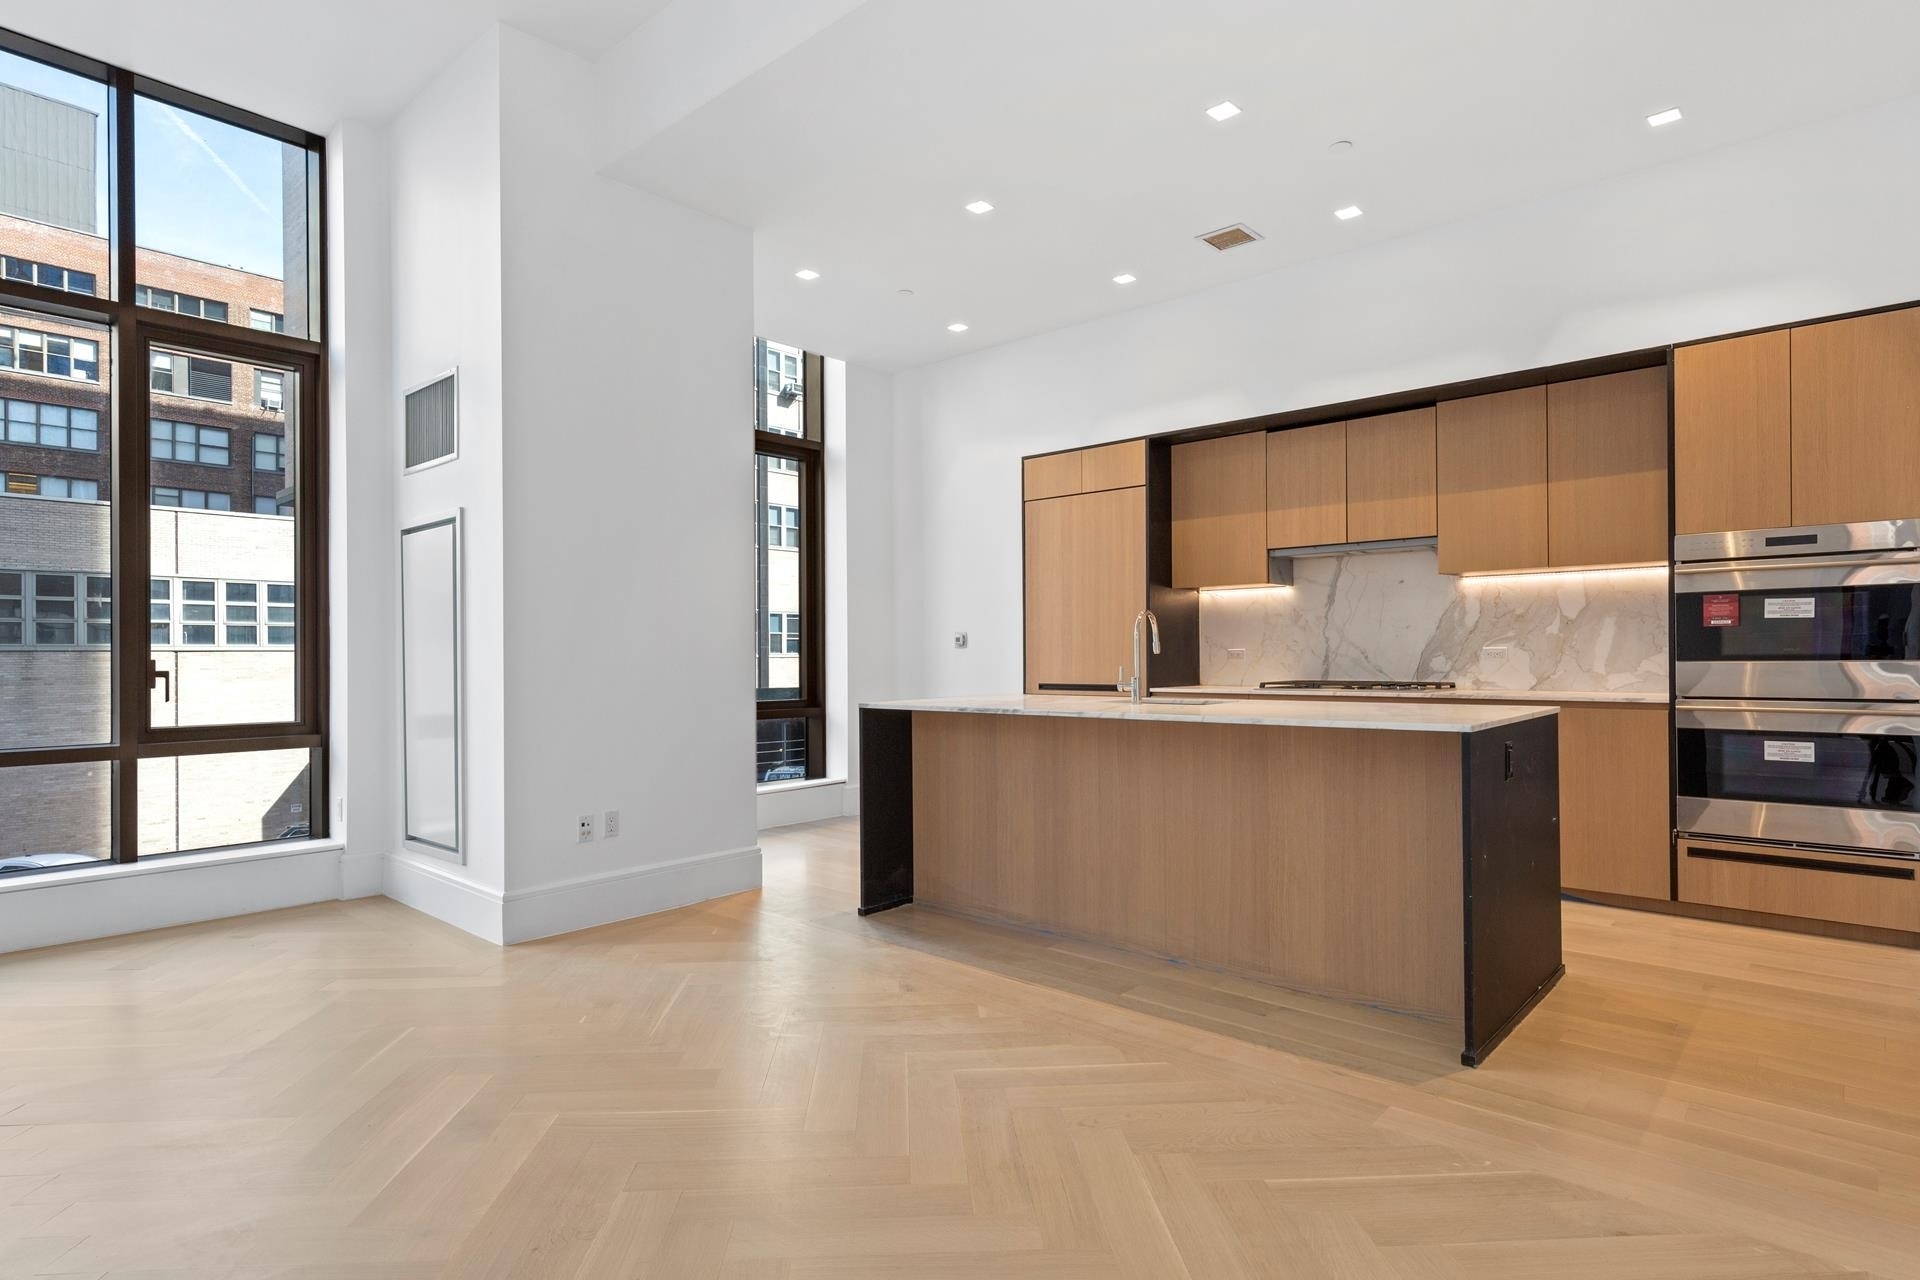 11. Condominiums for Sale at Gramercy Square, 215 E 19TH ST, 2C Gramercy Park, New York, New York 10003